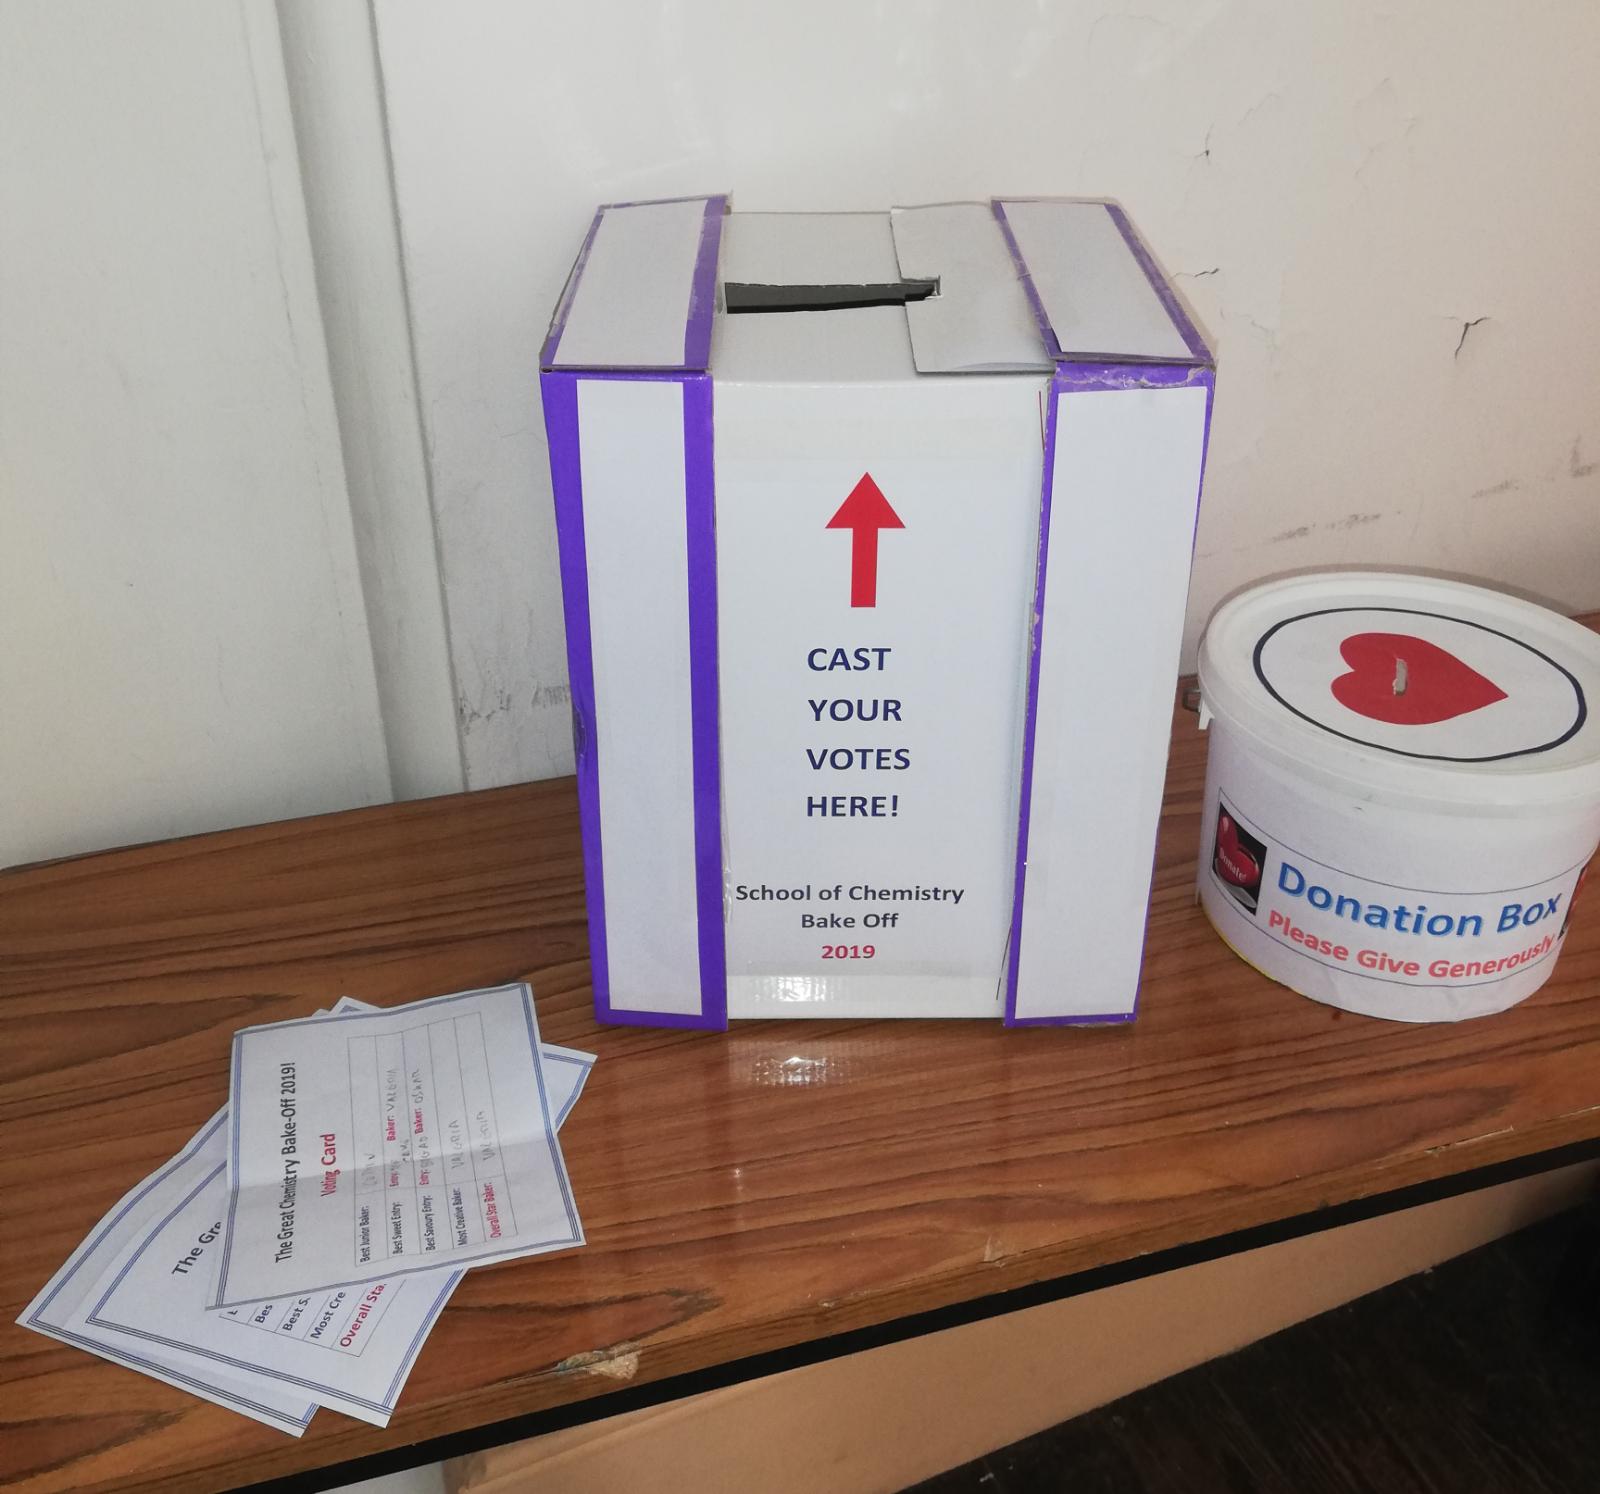 Voting box and donation bucket